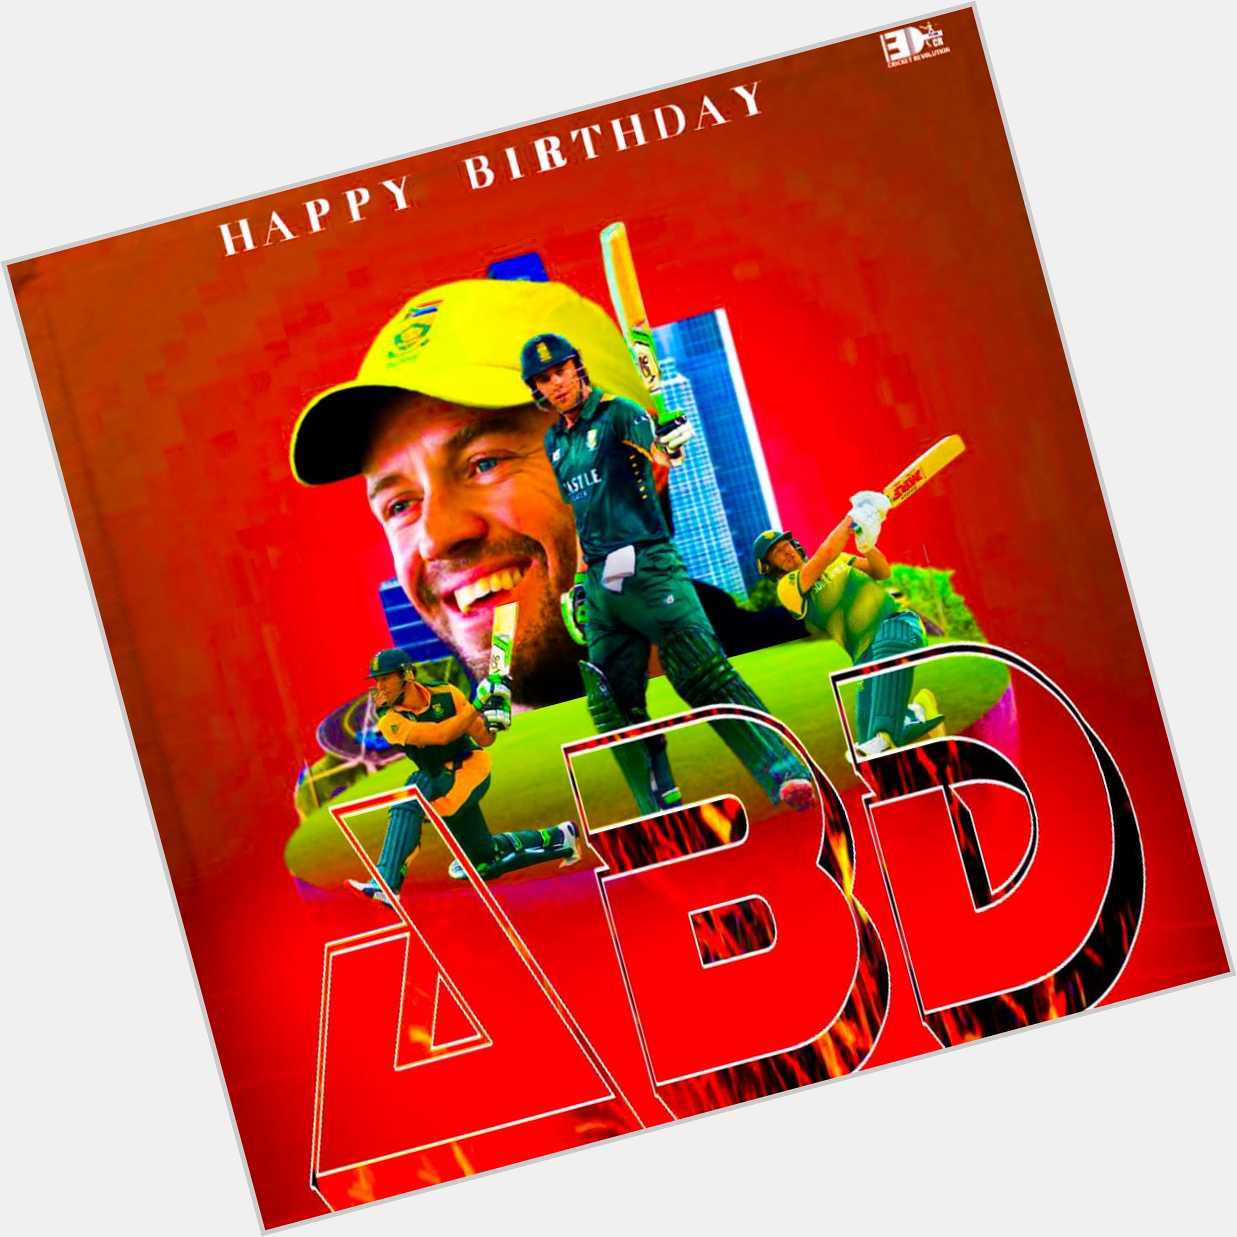 *Absolutely- Brilliant*

*AB Devilliers*

*Happy Birthday * 